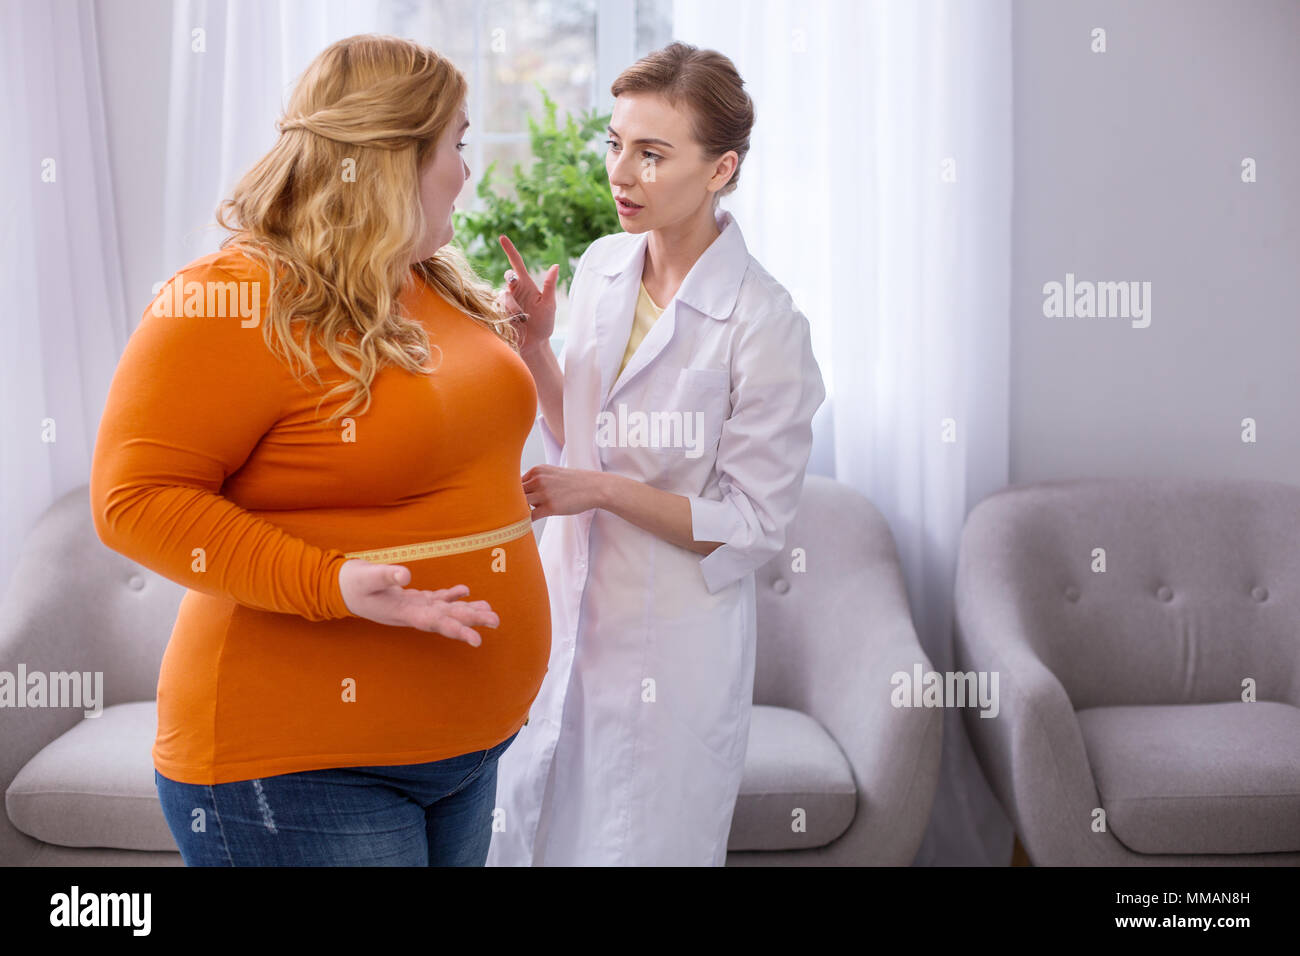 Serious doctor talking with a plump woman Stock Photo